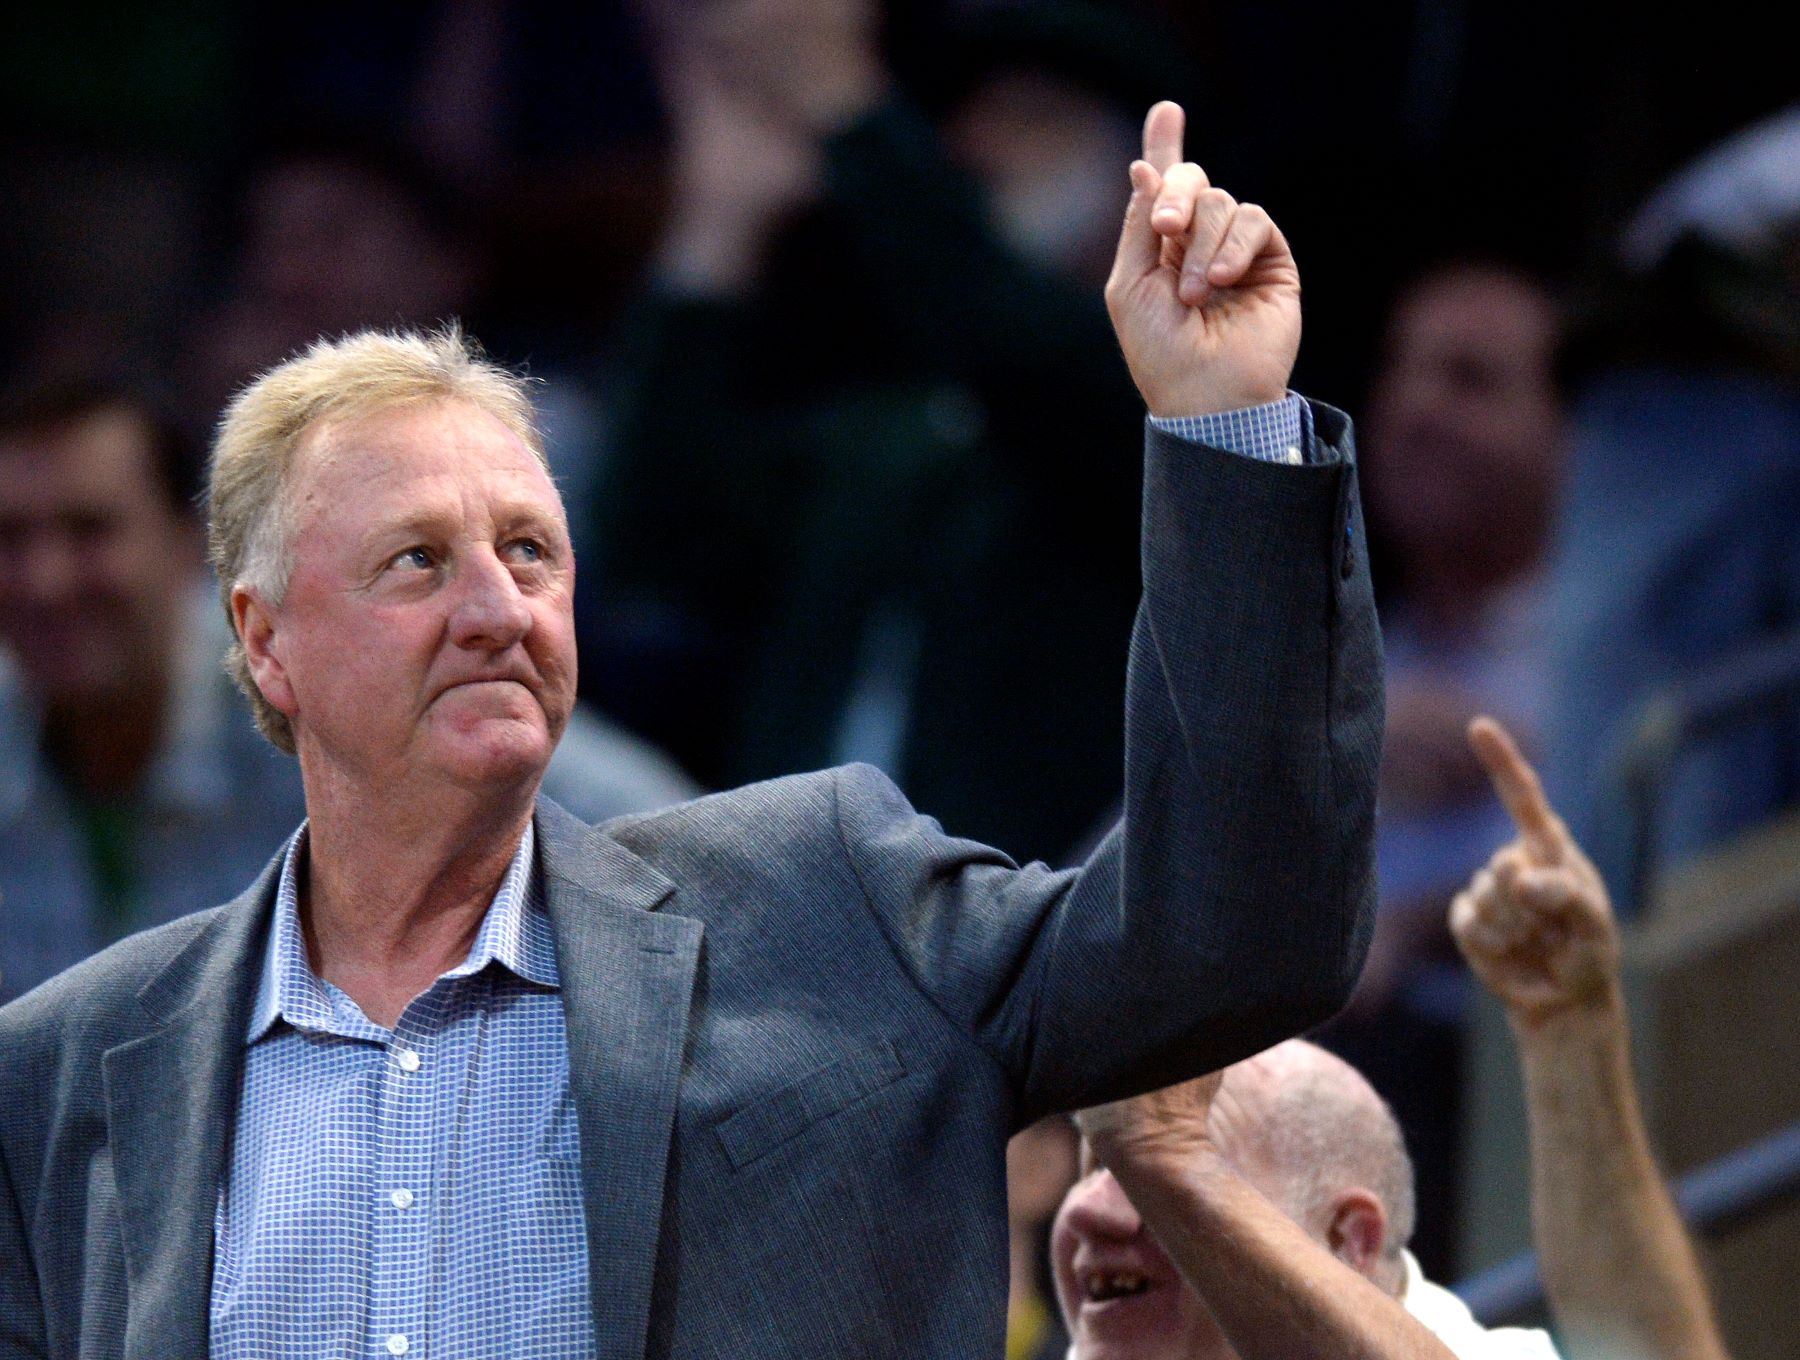 Former NBA team Boston Celtics player Larry Bird attending playoff game between the Celtics and Indiana Pacers